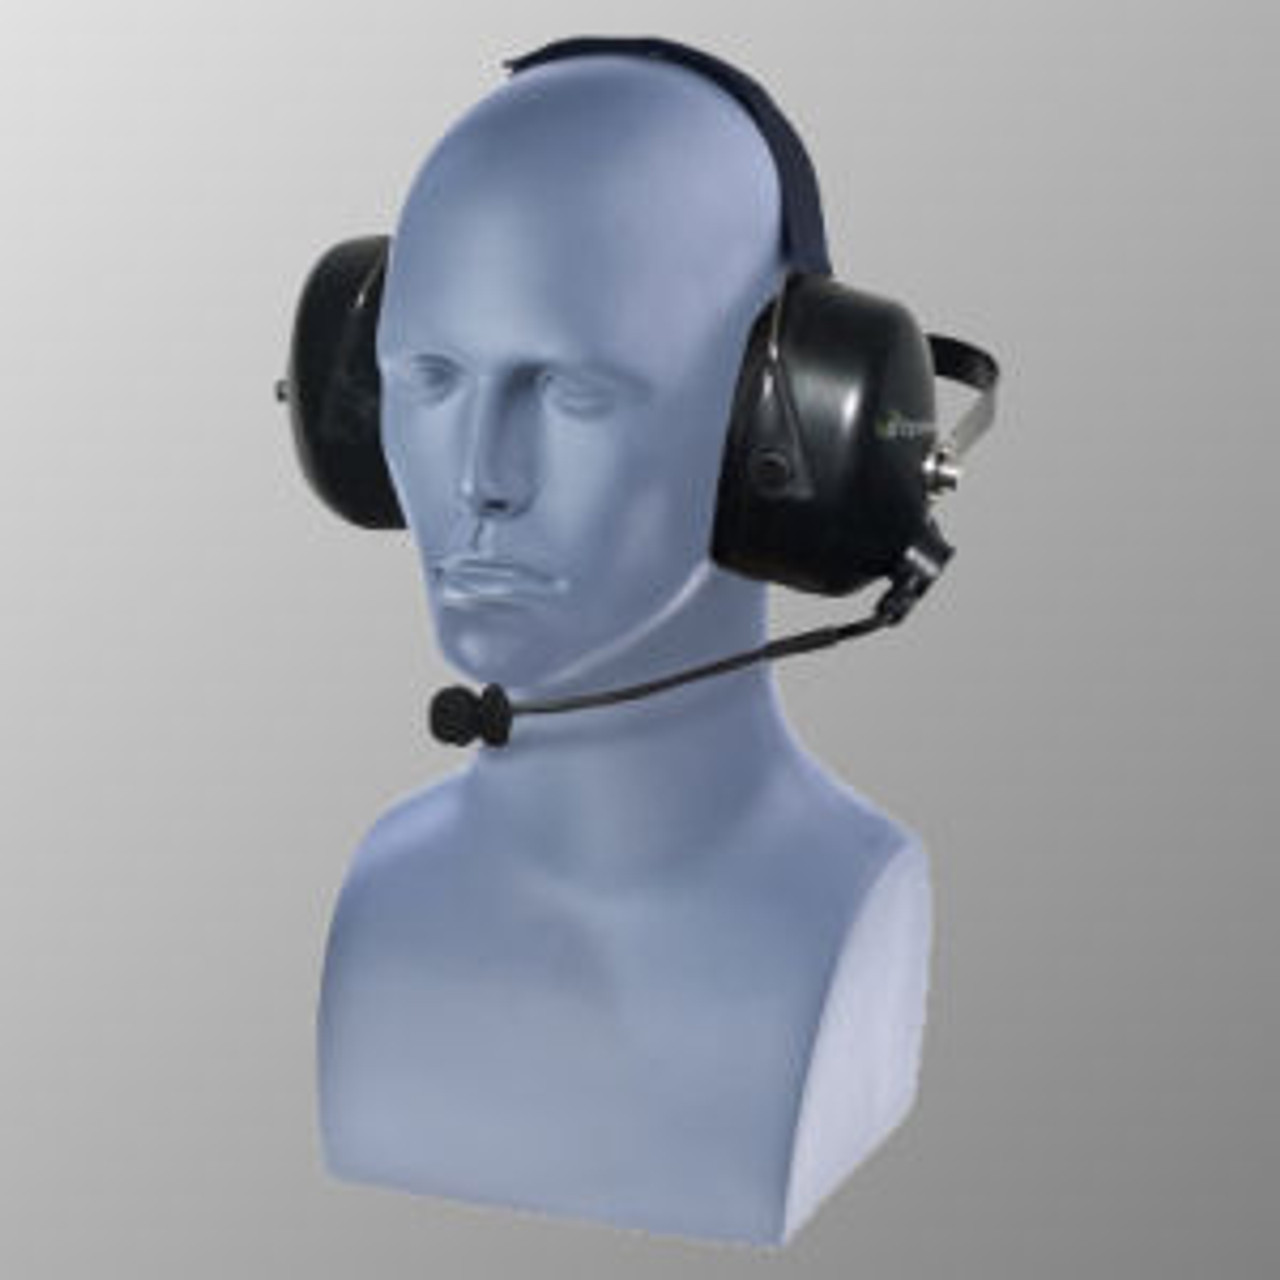 Motorola LTS2000 Noise Canceling Double Muff Behind The Head Headset